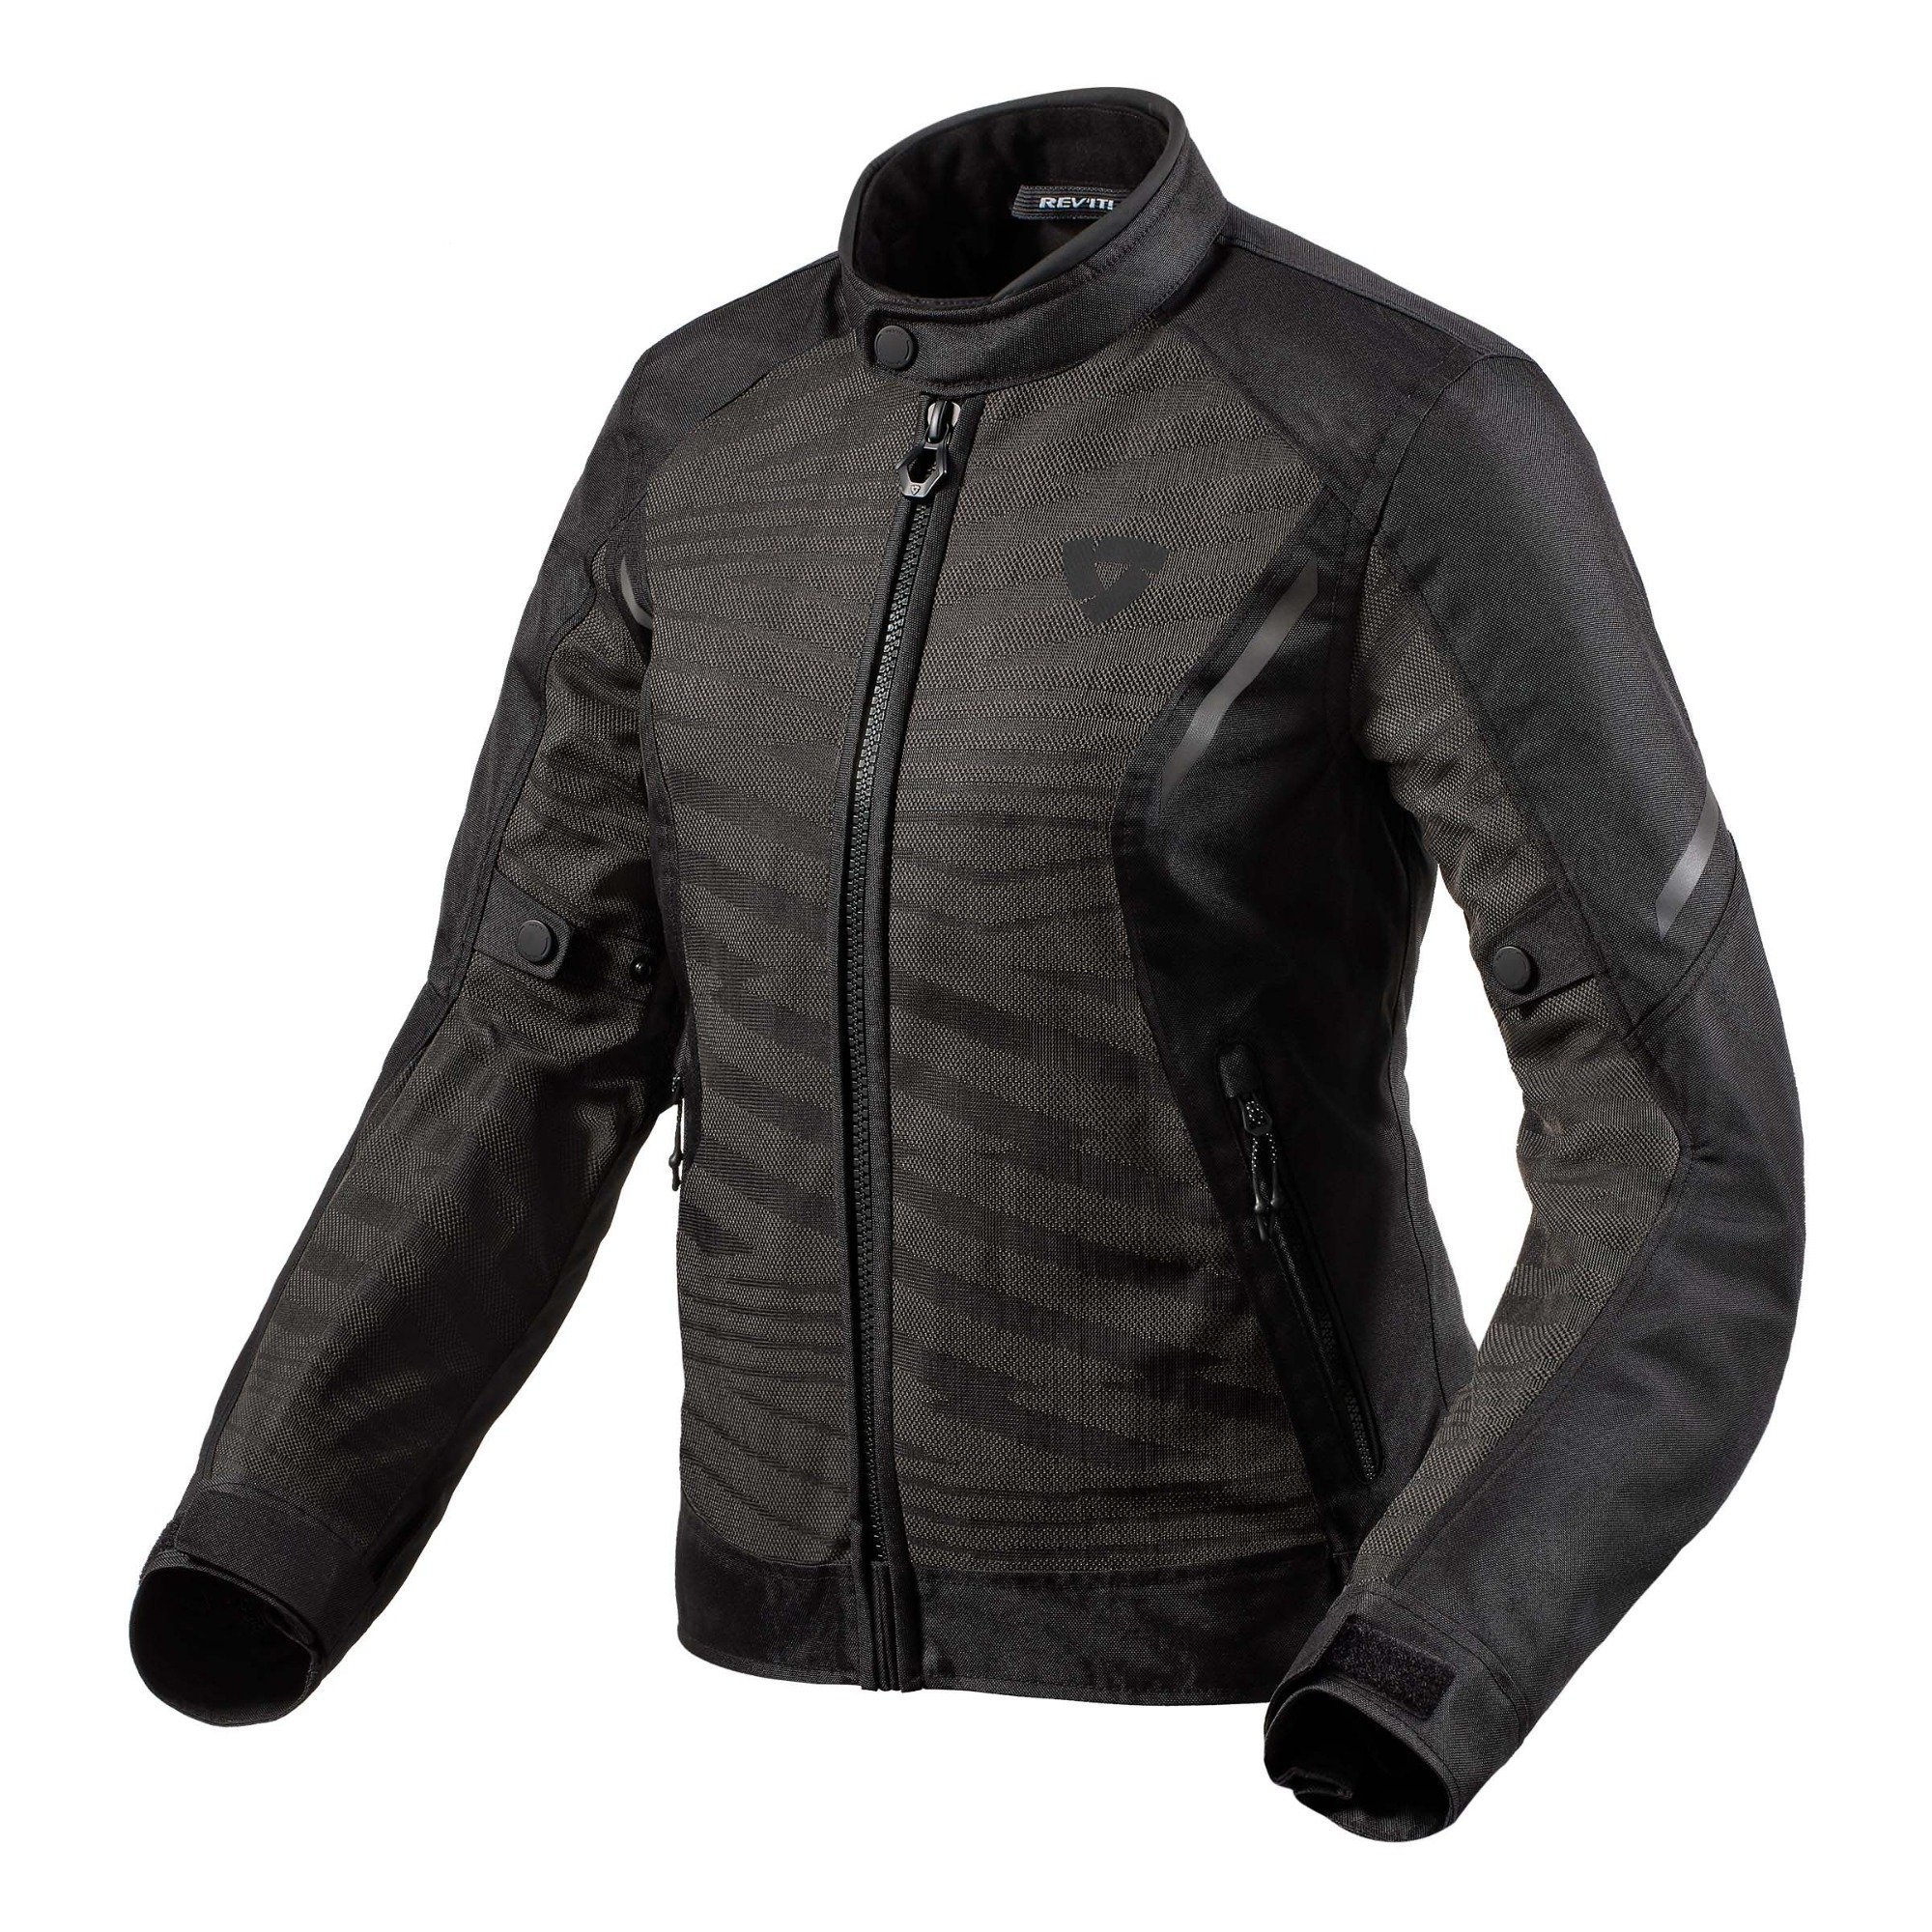 Image of REV'IT! Torque 2 H2O Jacket Lady Black Anthracite Size 38 ID 8700001345514